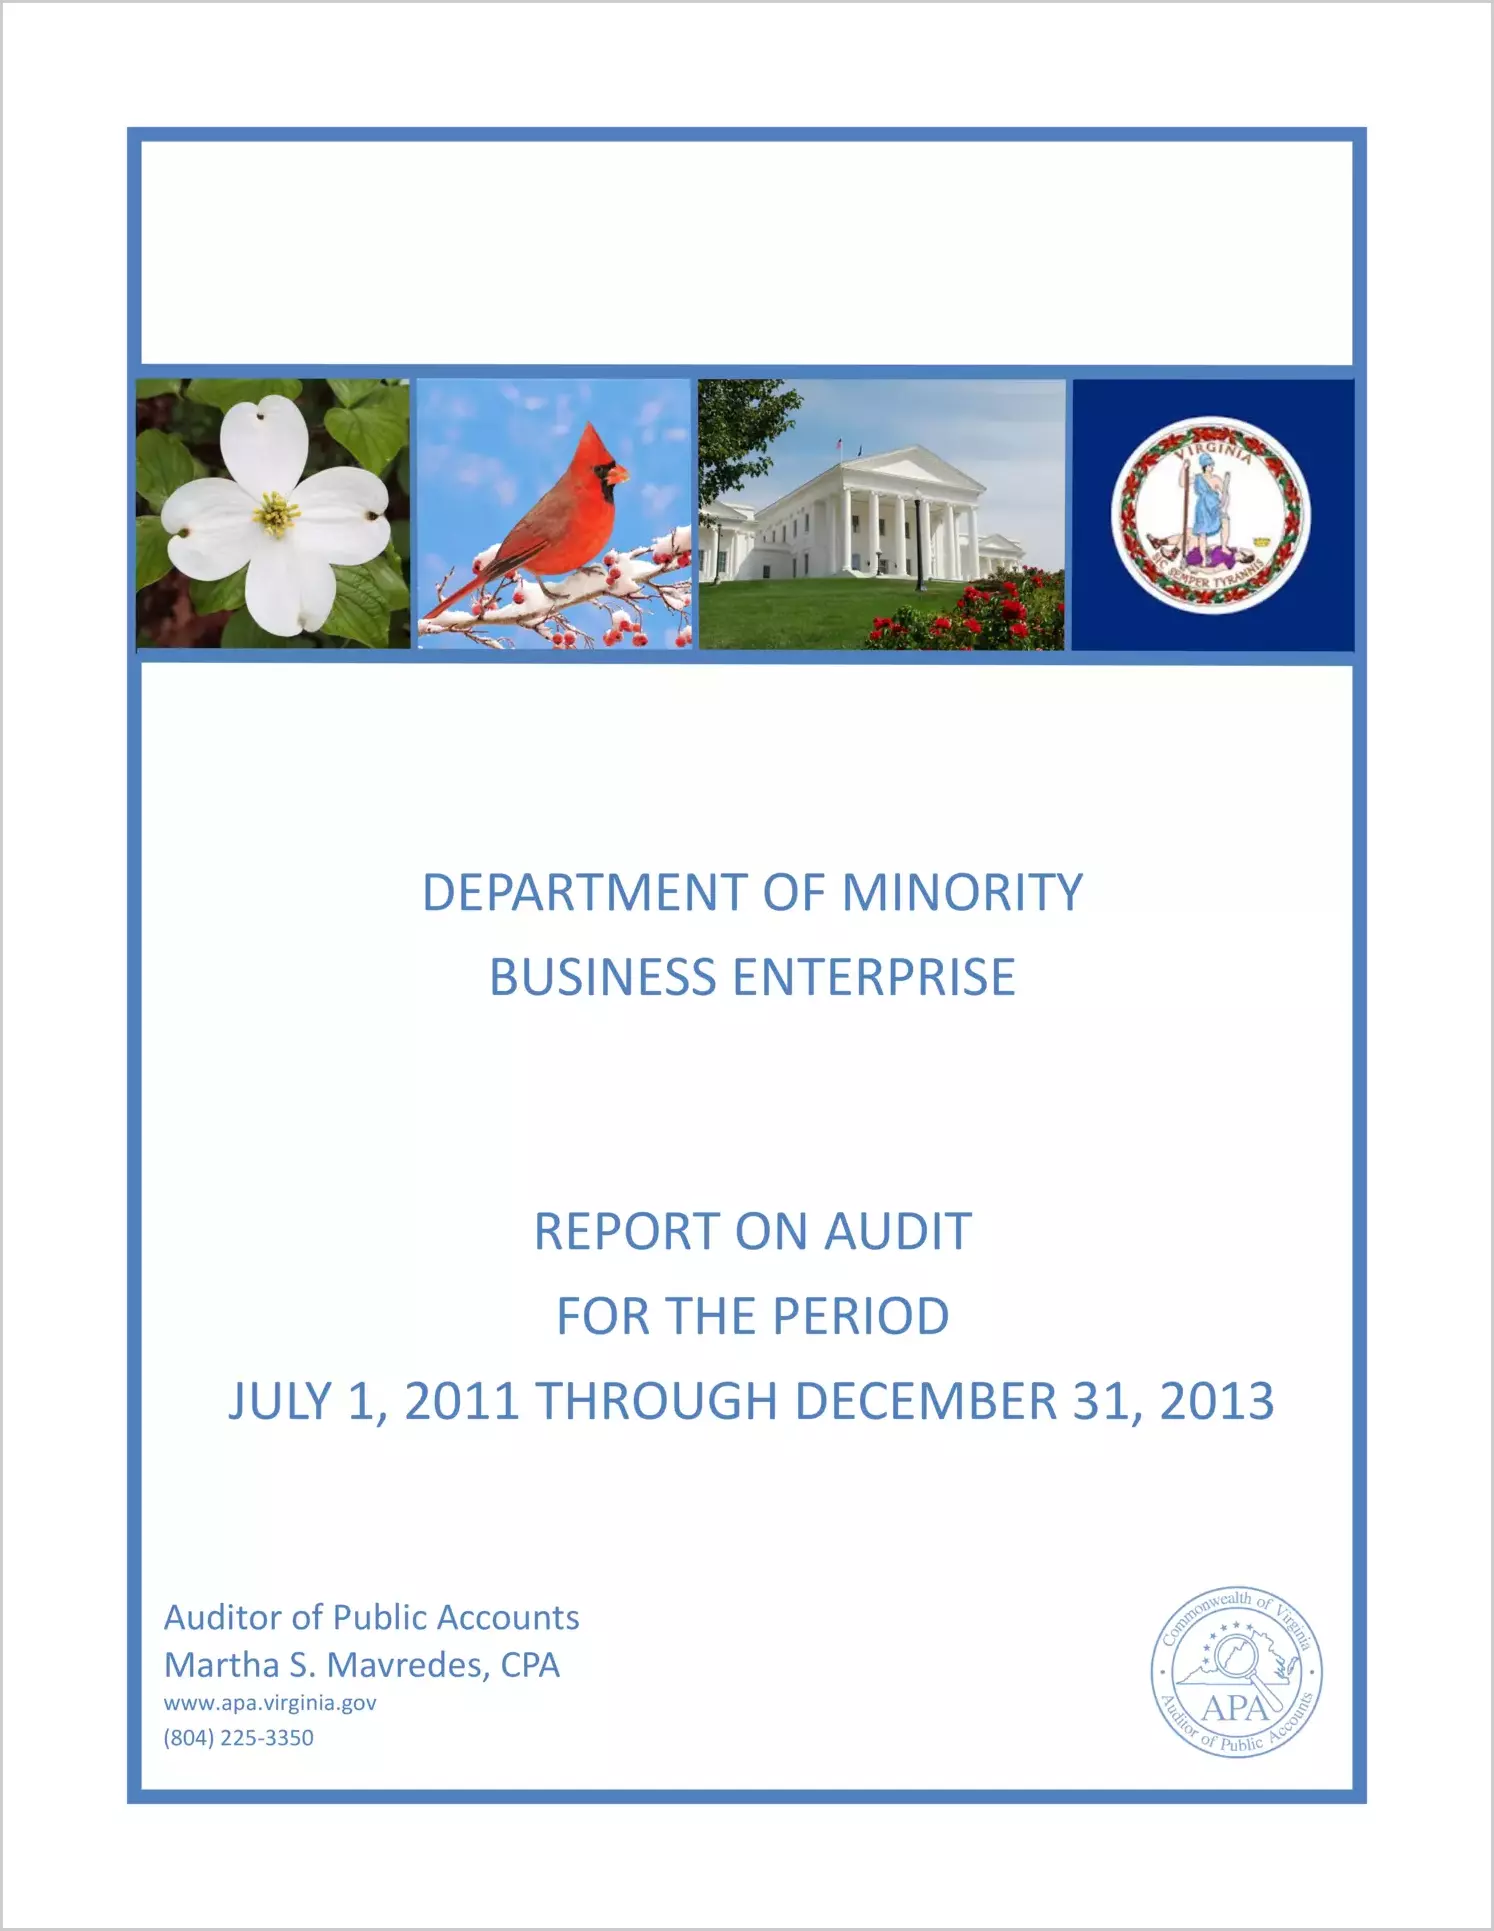 Department of Minority Business Enterprise report on audit for the period July 1, 2011 through December 31, 2013